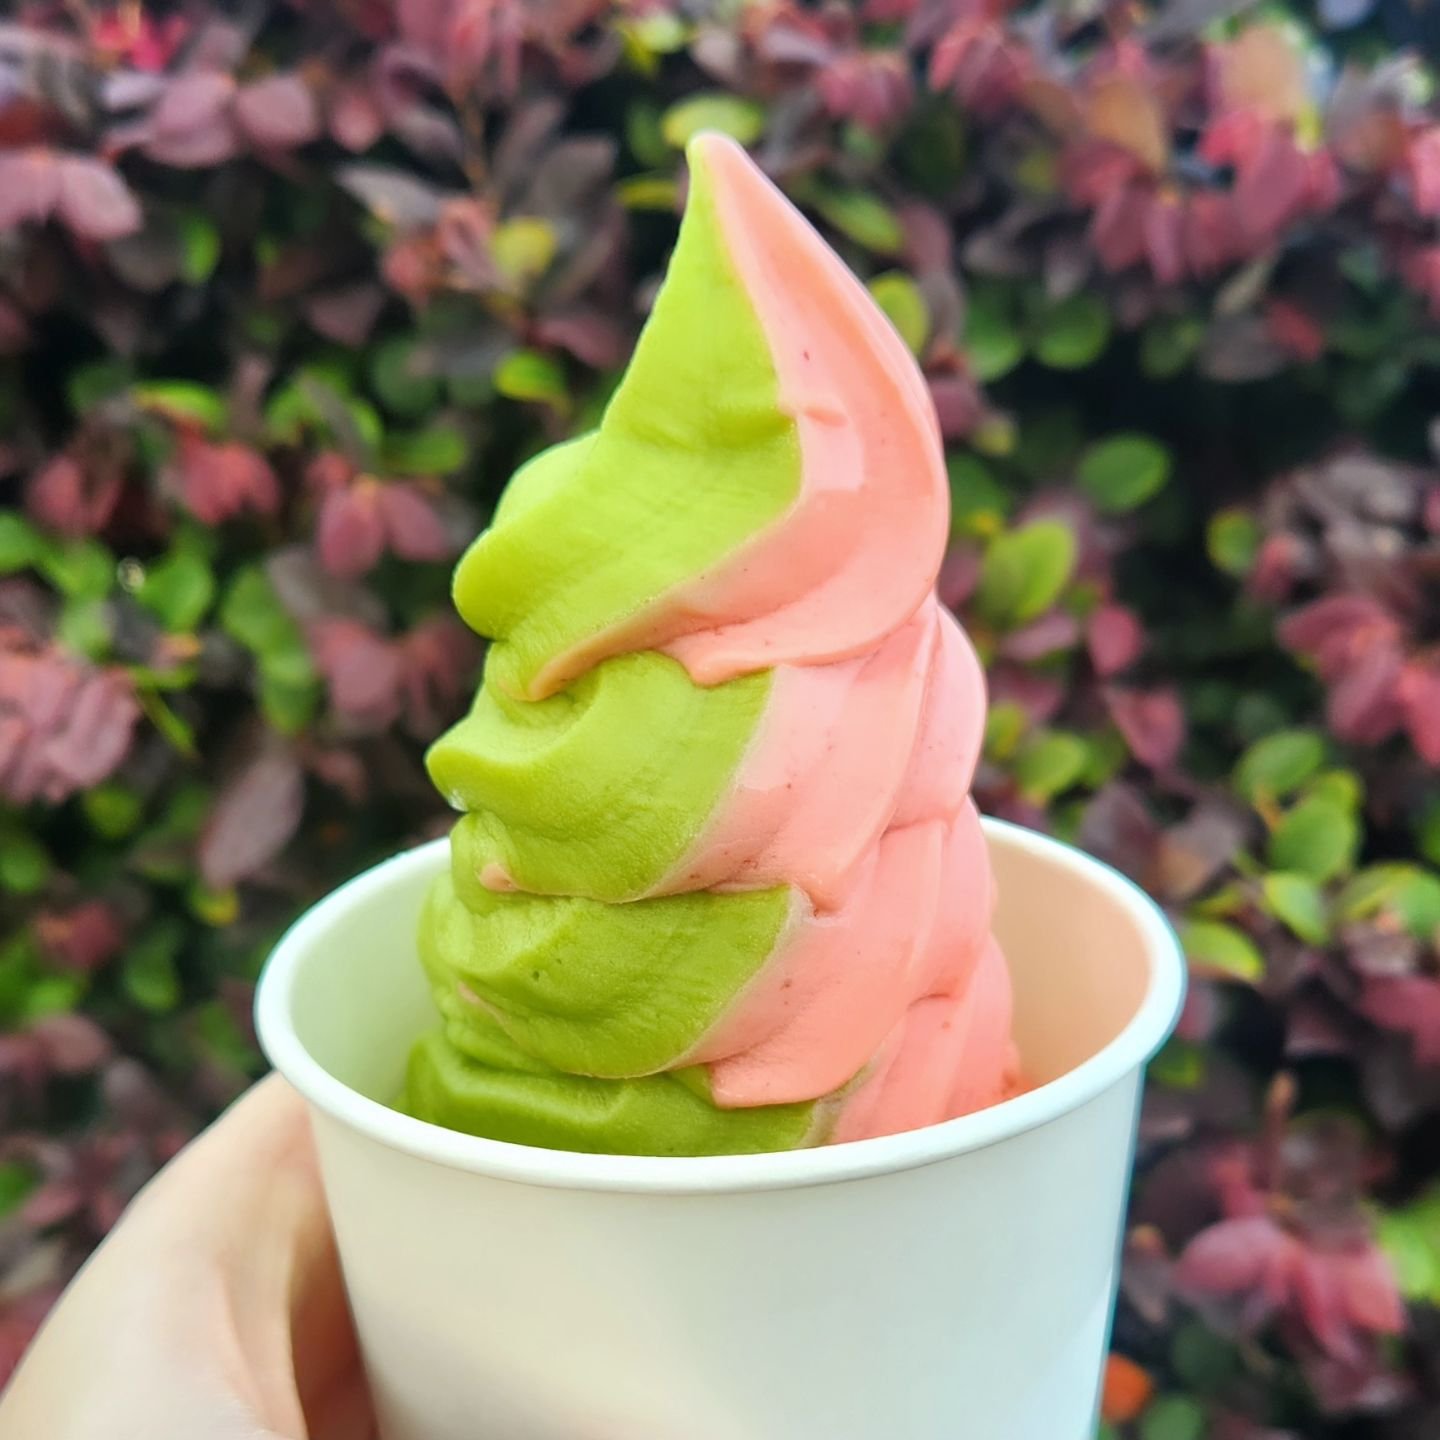 We'll have a special strawberry matcha swirl for a limited time! Come on downand try this dreamy combo yourself! 🍦🍵🍓